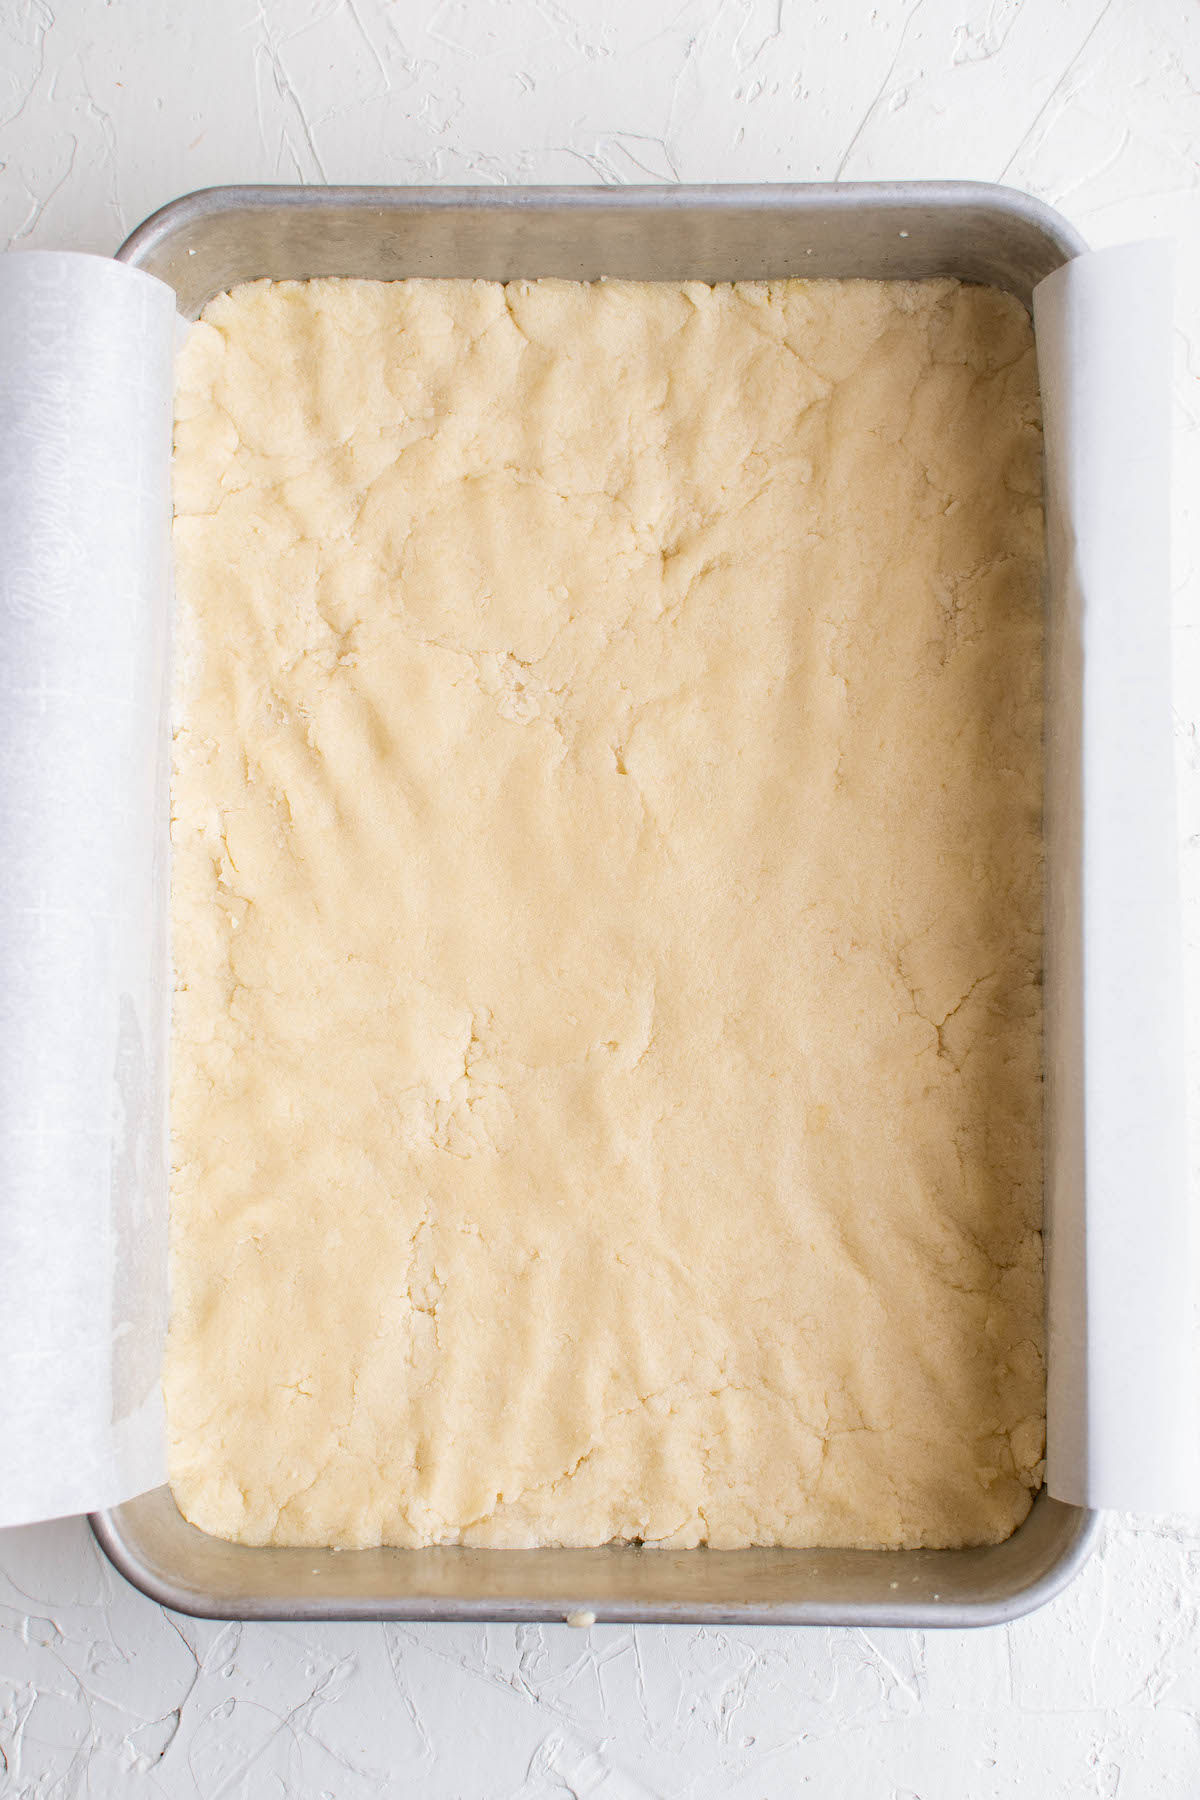 Sugar cookie dough pressed into a baking dish lined with parchment paper.